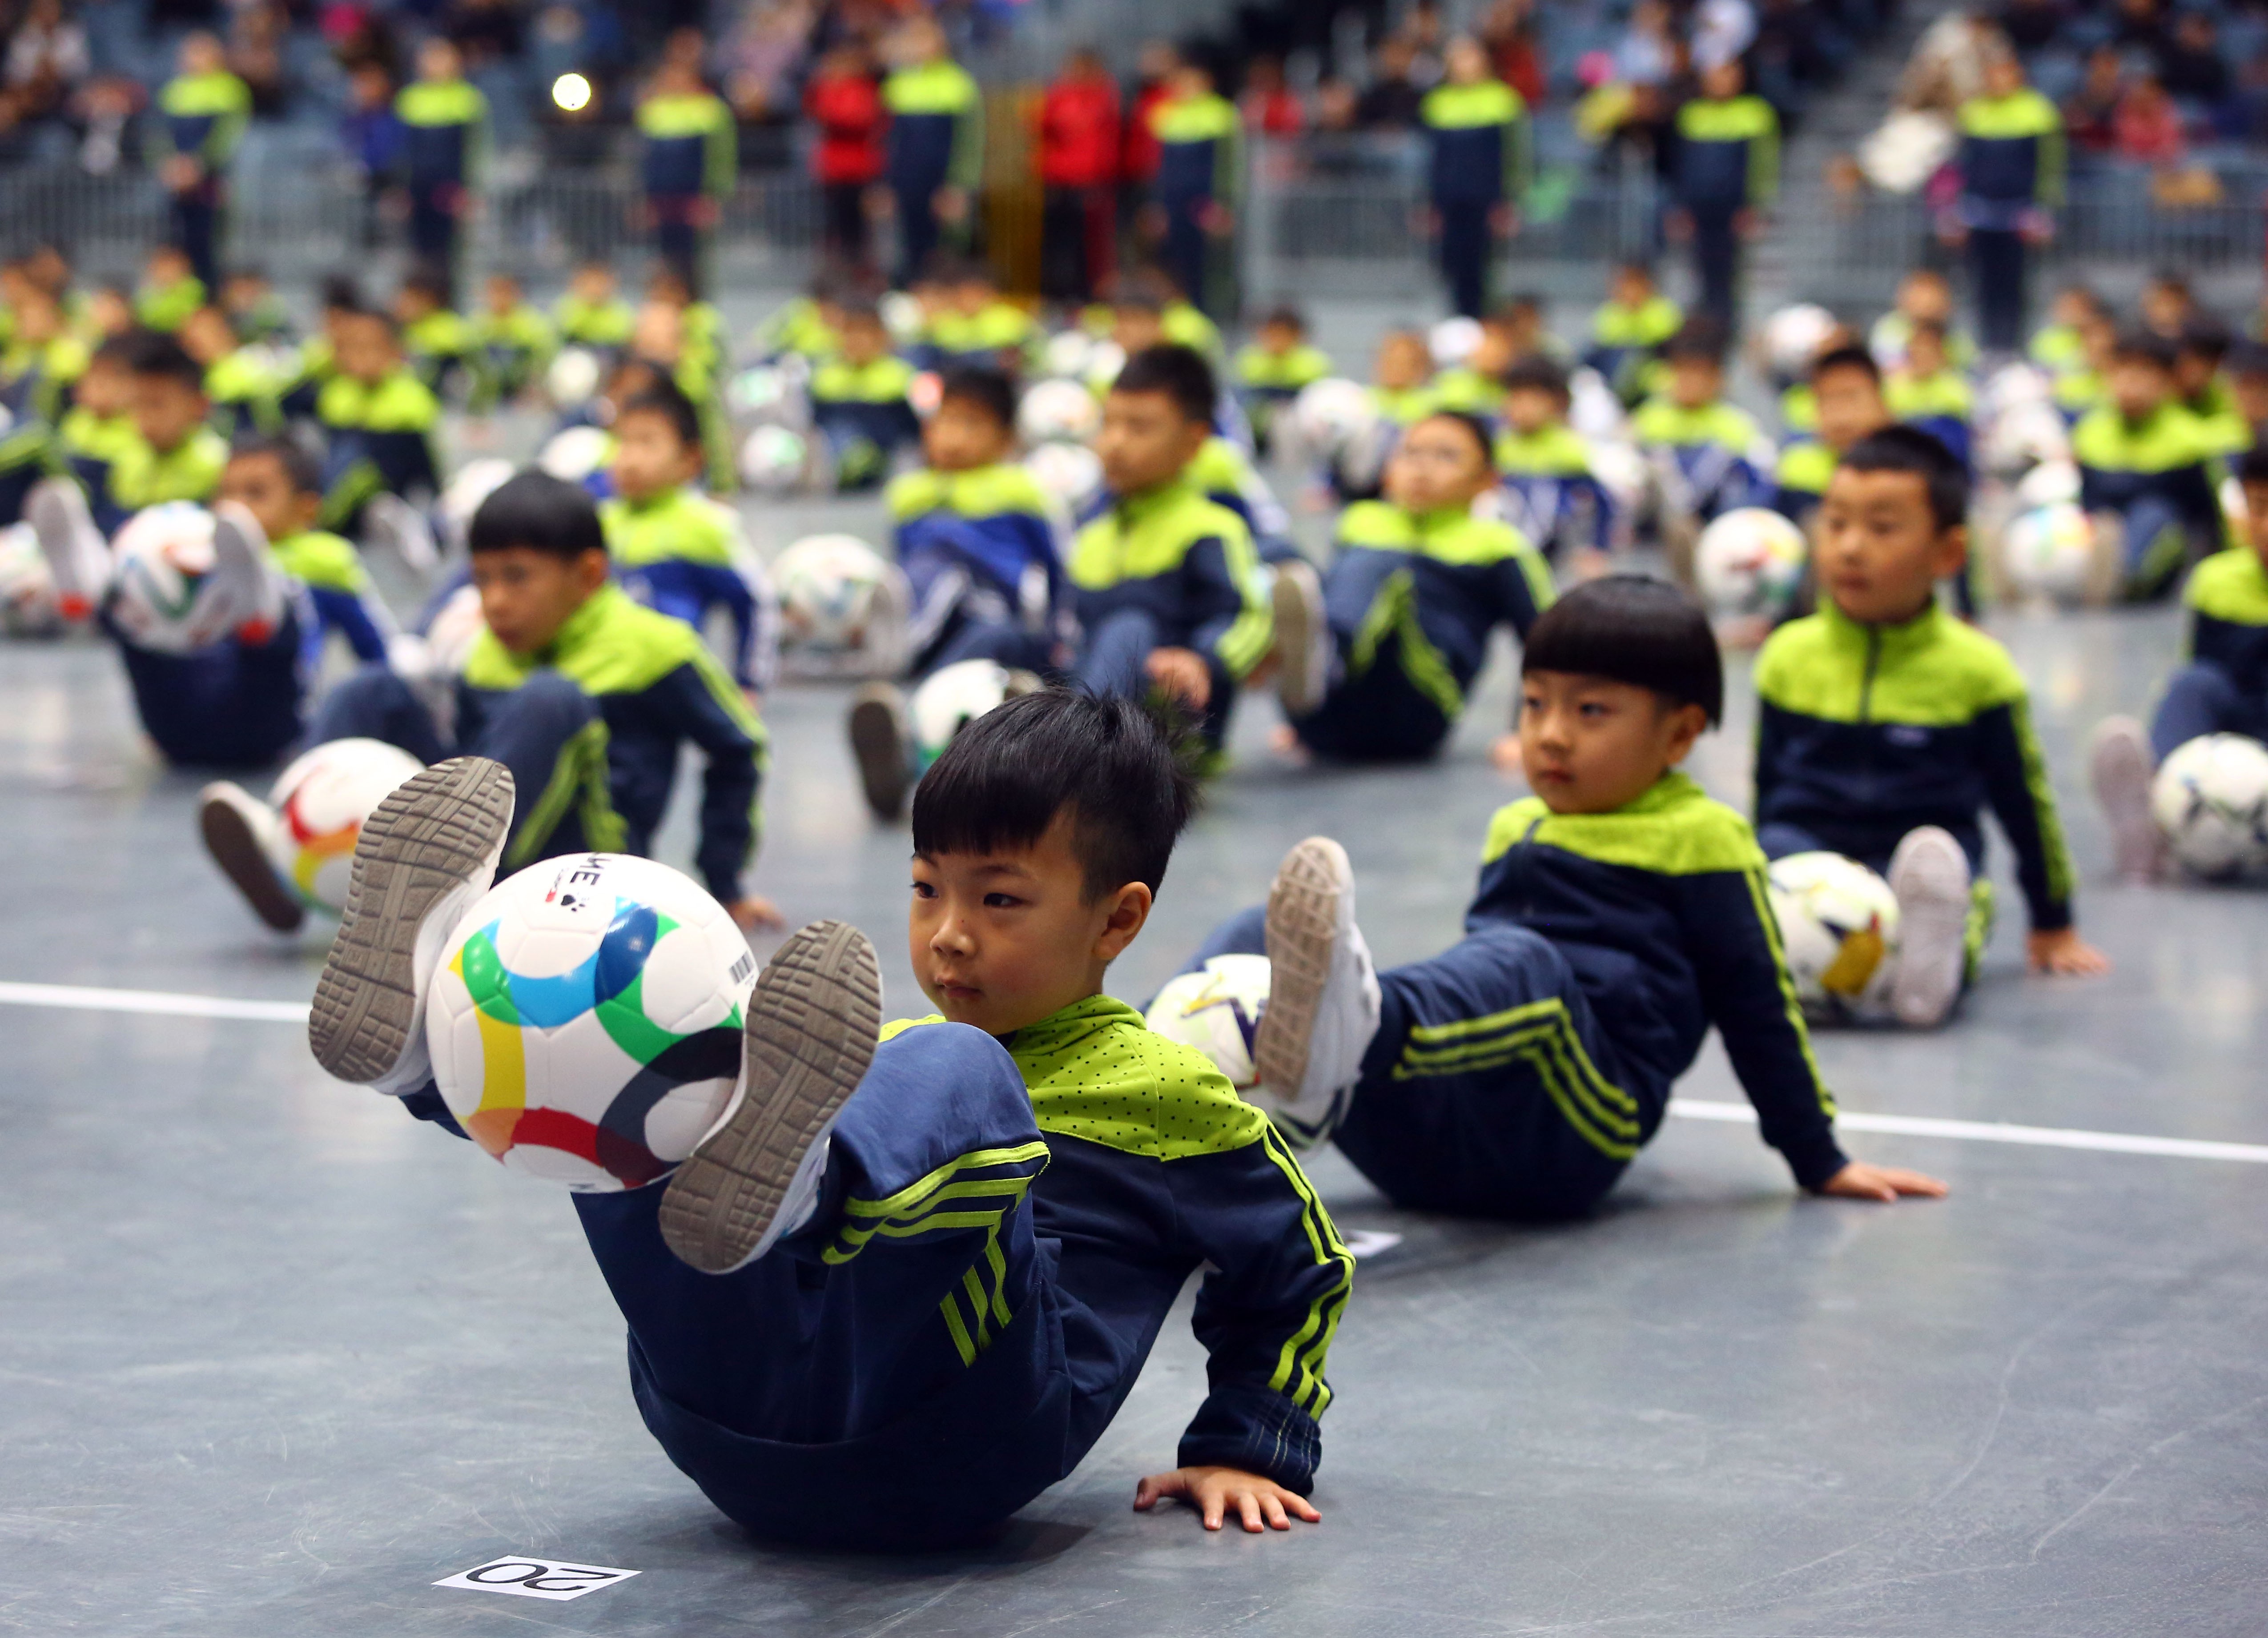 Children playing with their footballs at a gymnasium in Tianjin on December 16, 2017. Photo: Xinhua